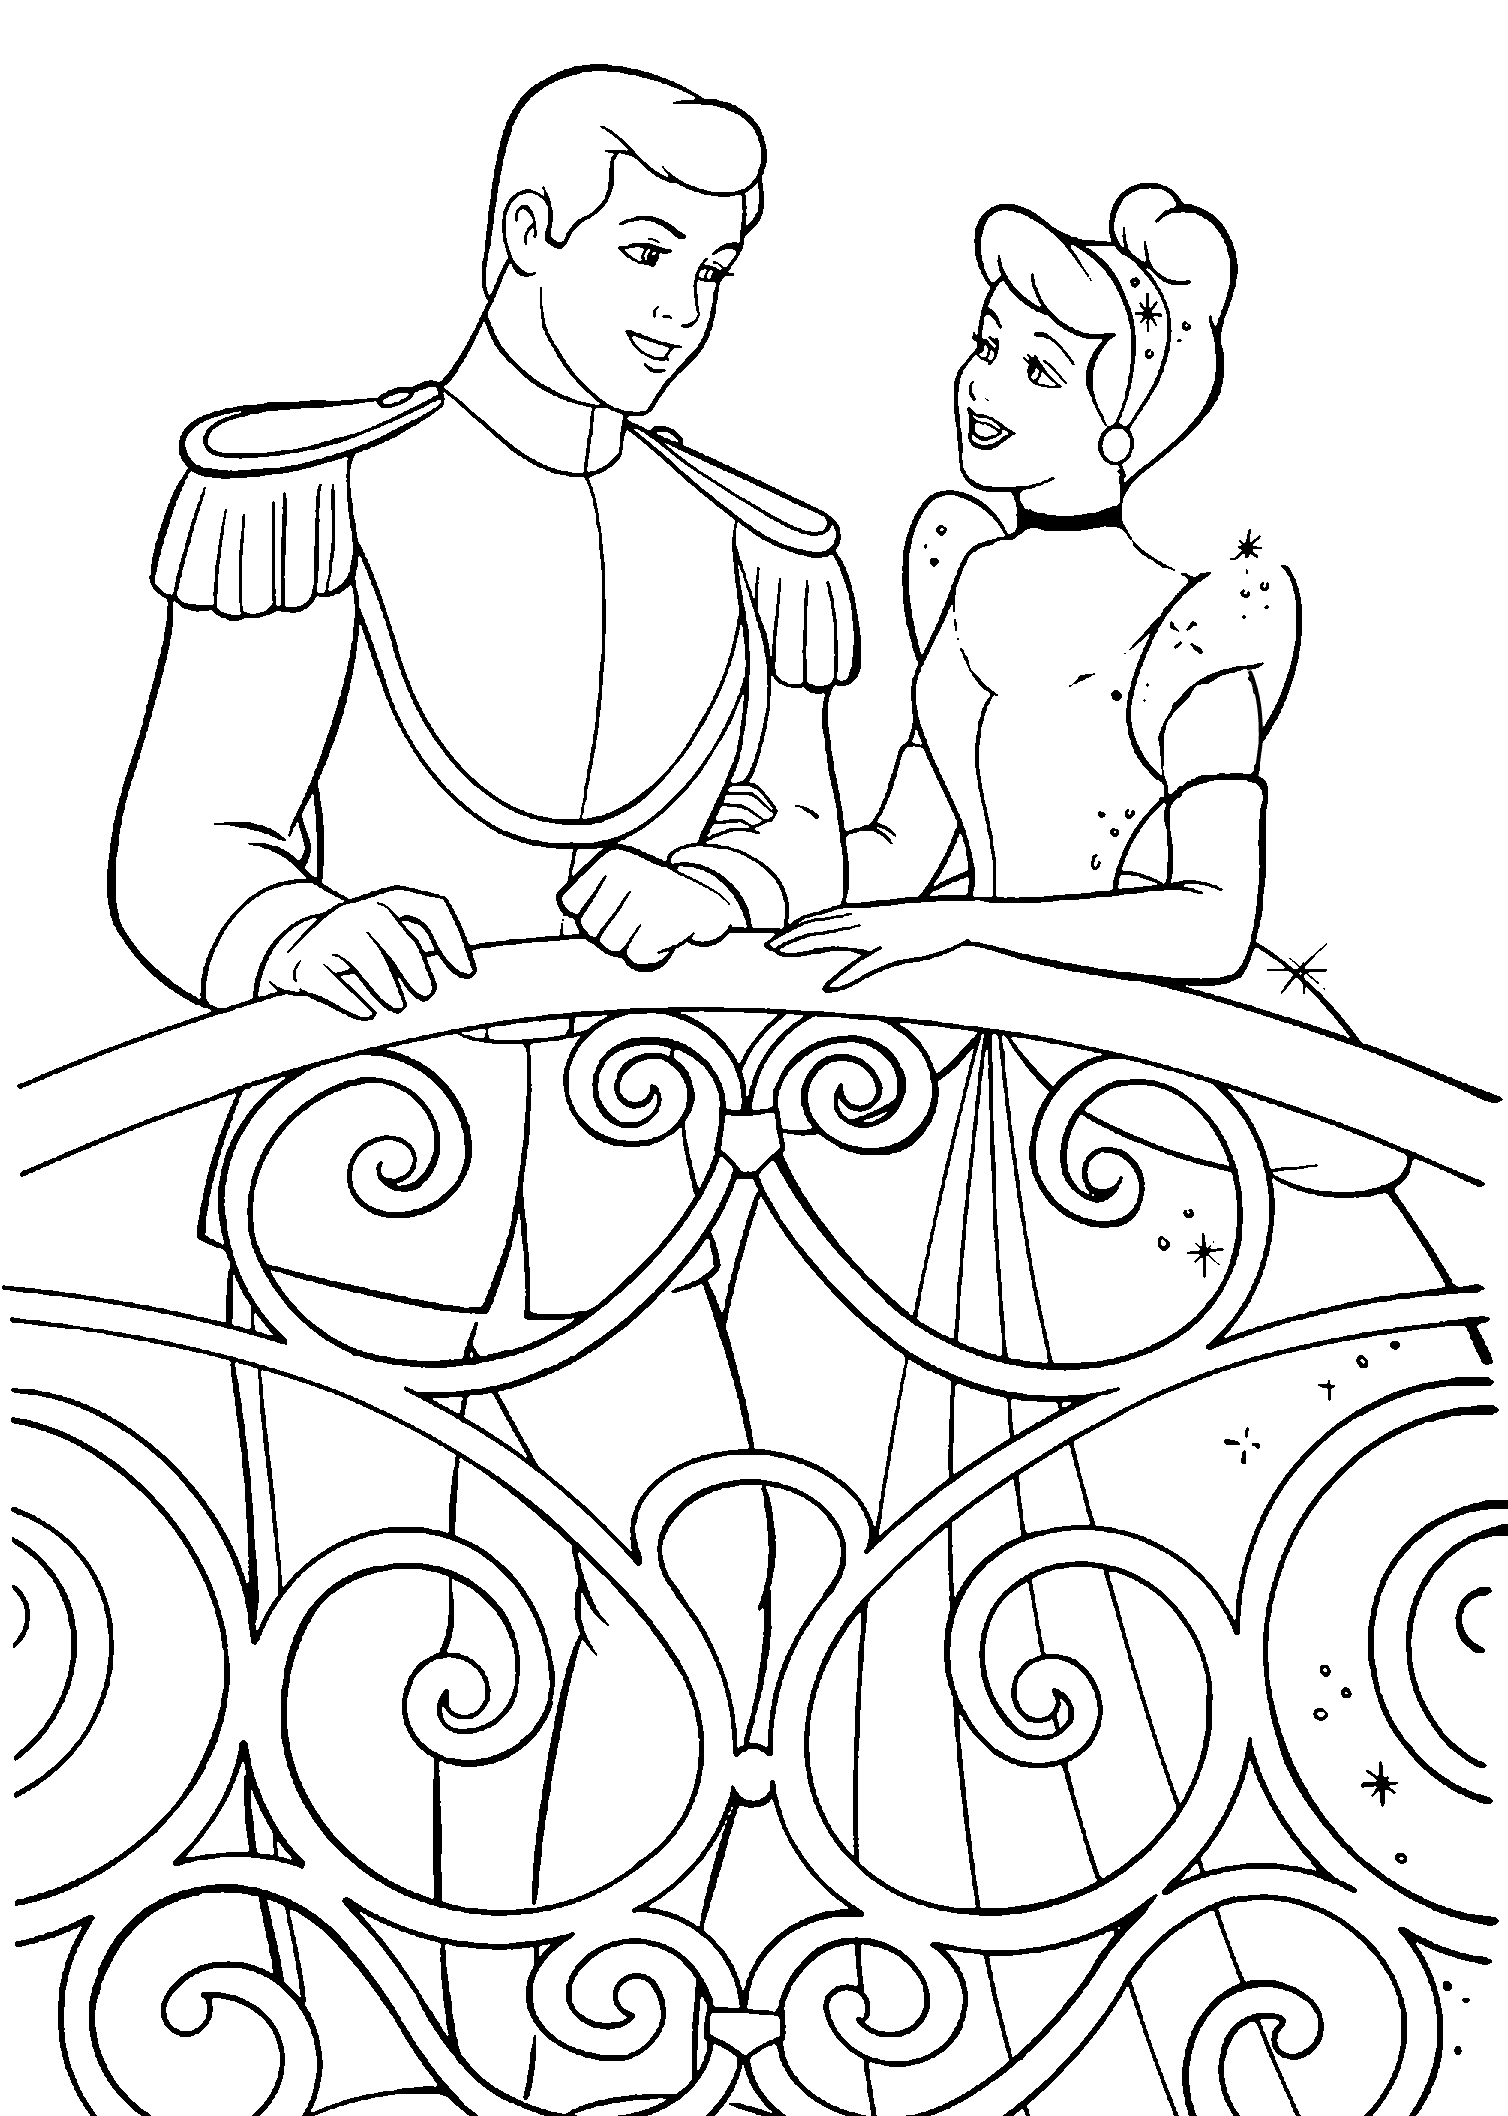 Free Printable Disney Princess Coloring Pages For Kids Coloring Wallpapers Download Free Images Wallpaper [coloring654.blogspot.com]